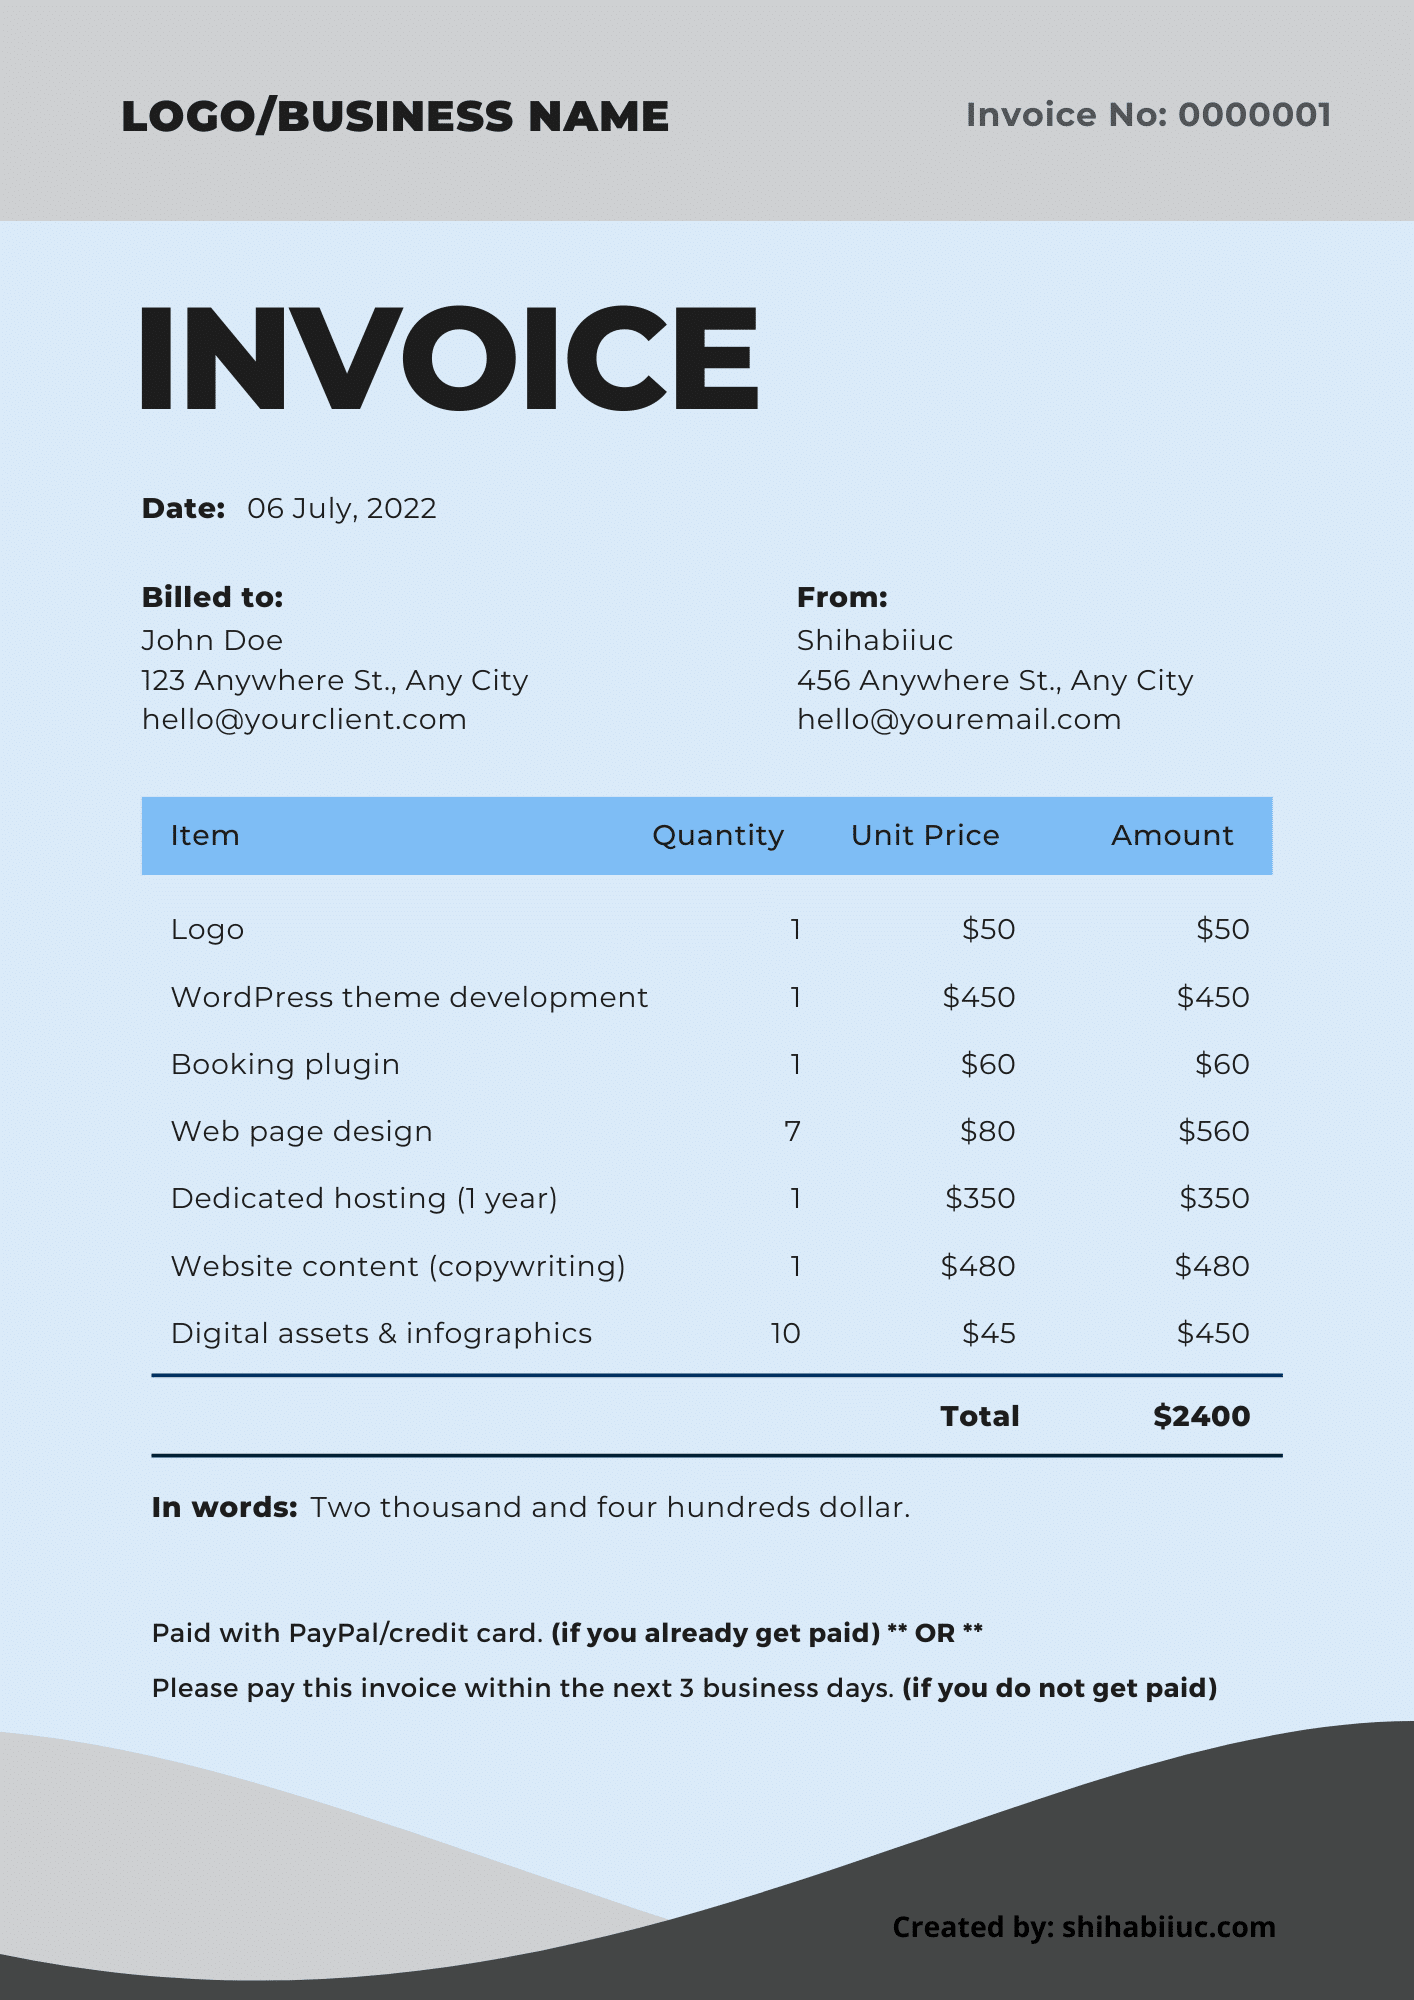 Invoice template for freelancers